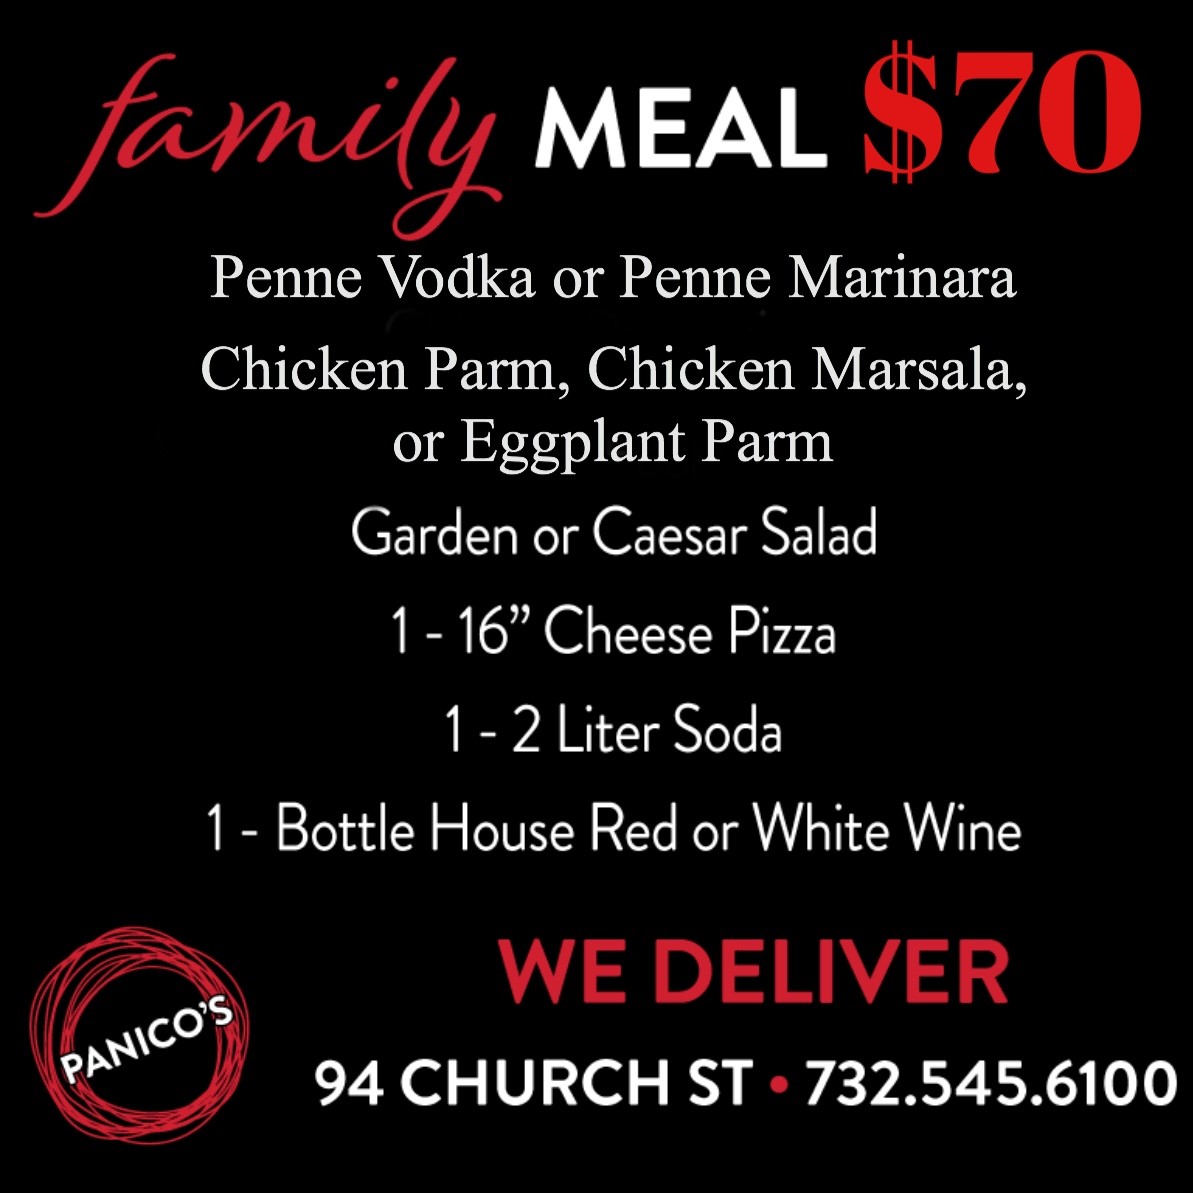 Family Meal $70. Chicken Parmagiana. Chicken Marsala or Eggplant Parmigiana. Garden or Caesar Salad. One 16 inch cheese pizza. one 2 liter soda. bottle house red or white wine. we deliver. 94 church st. - (732) 545-6100